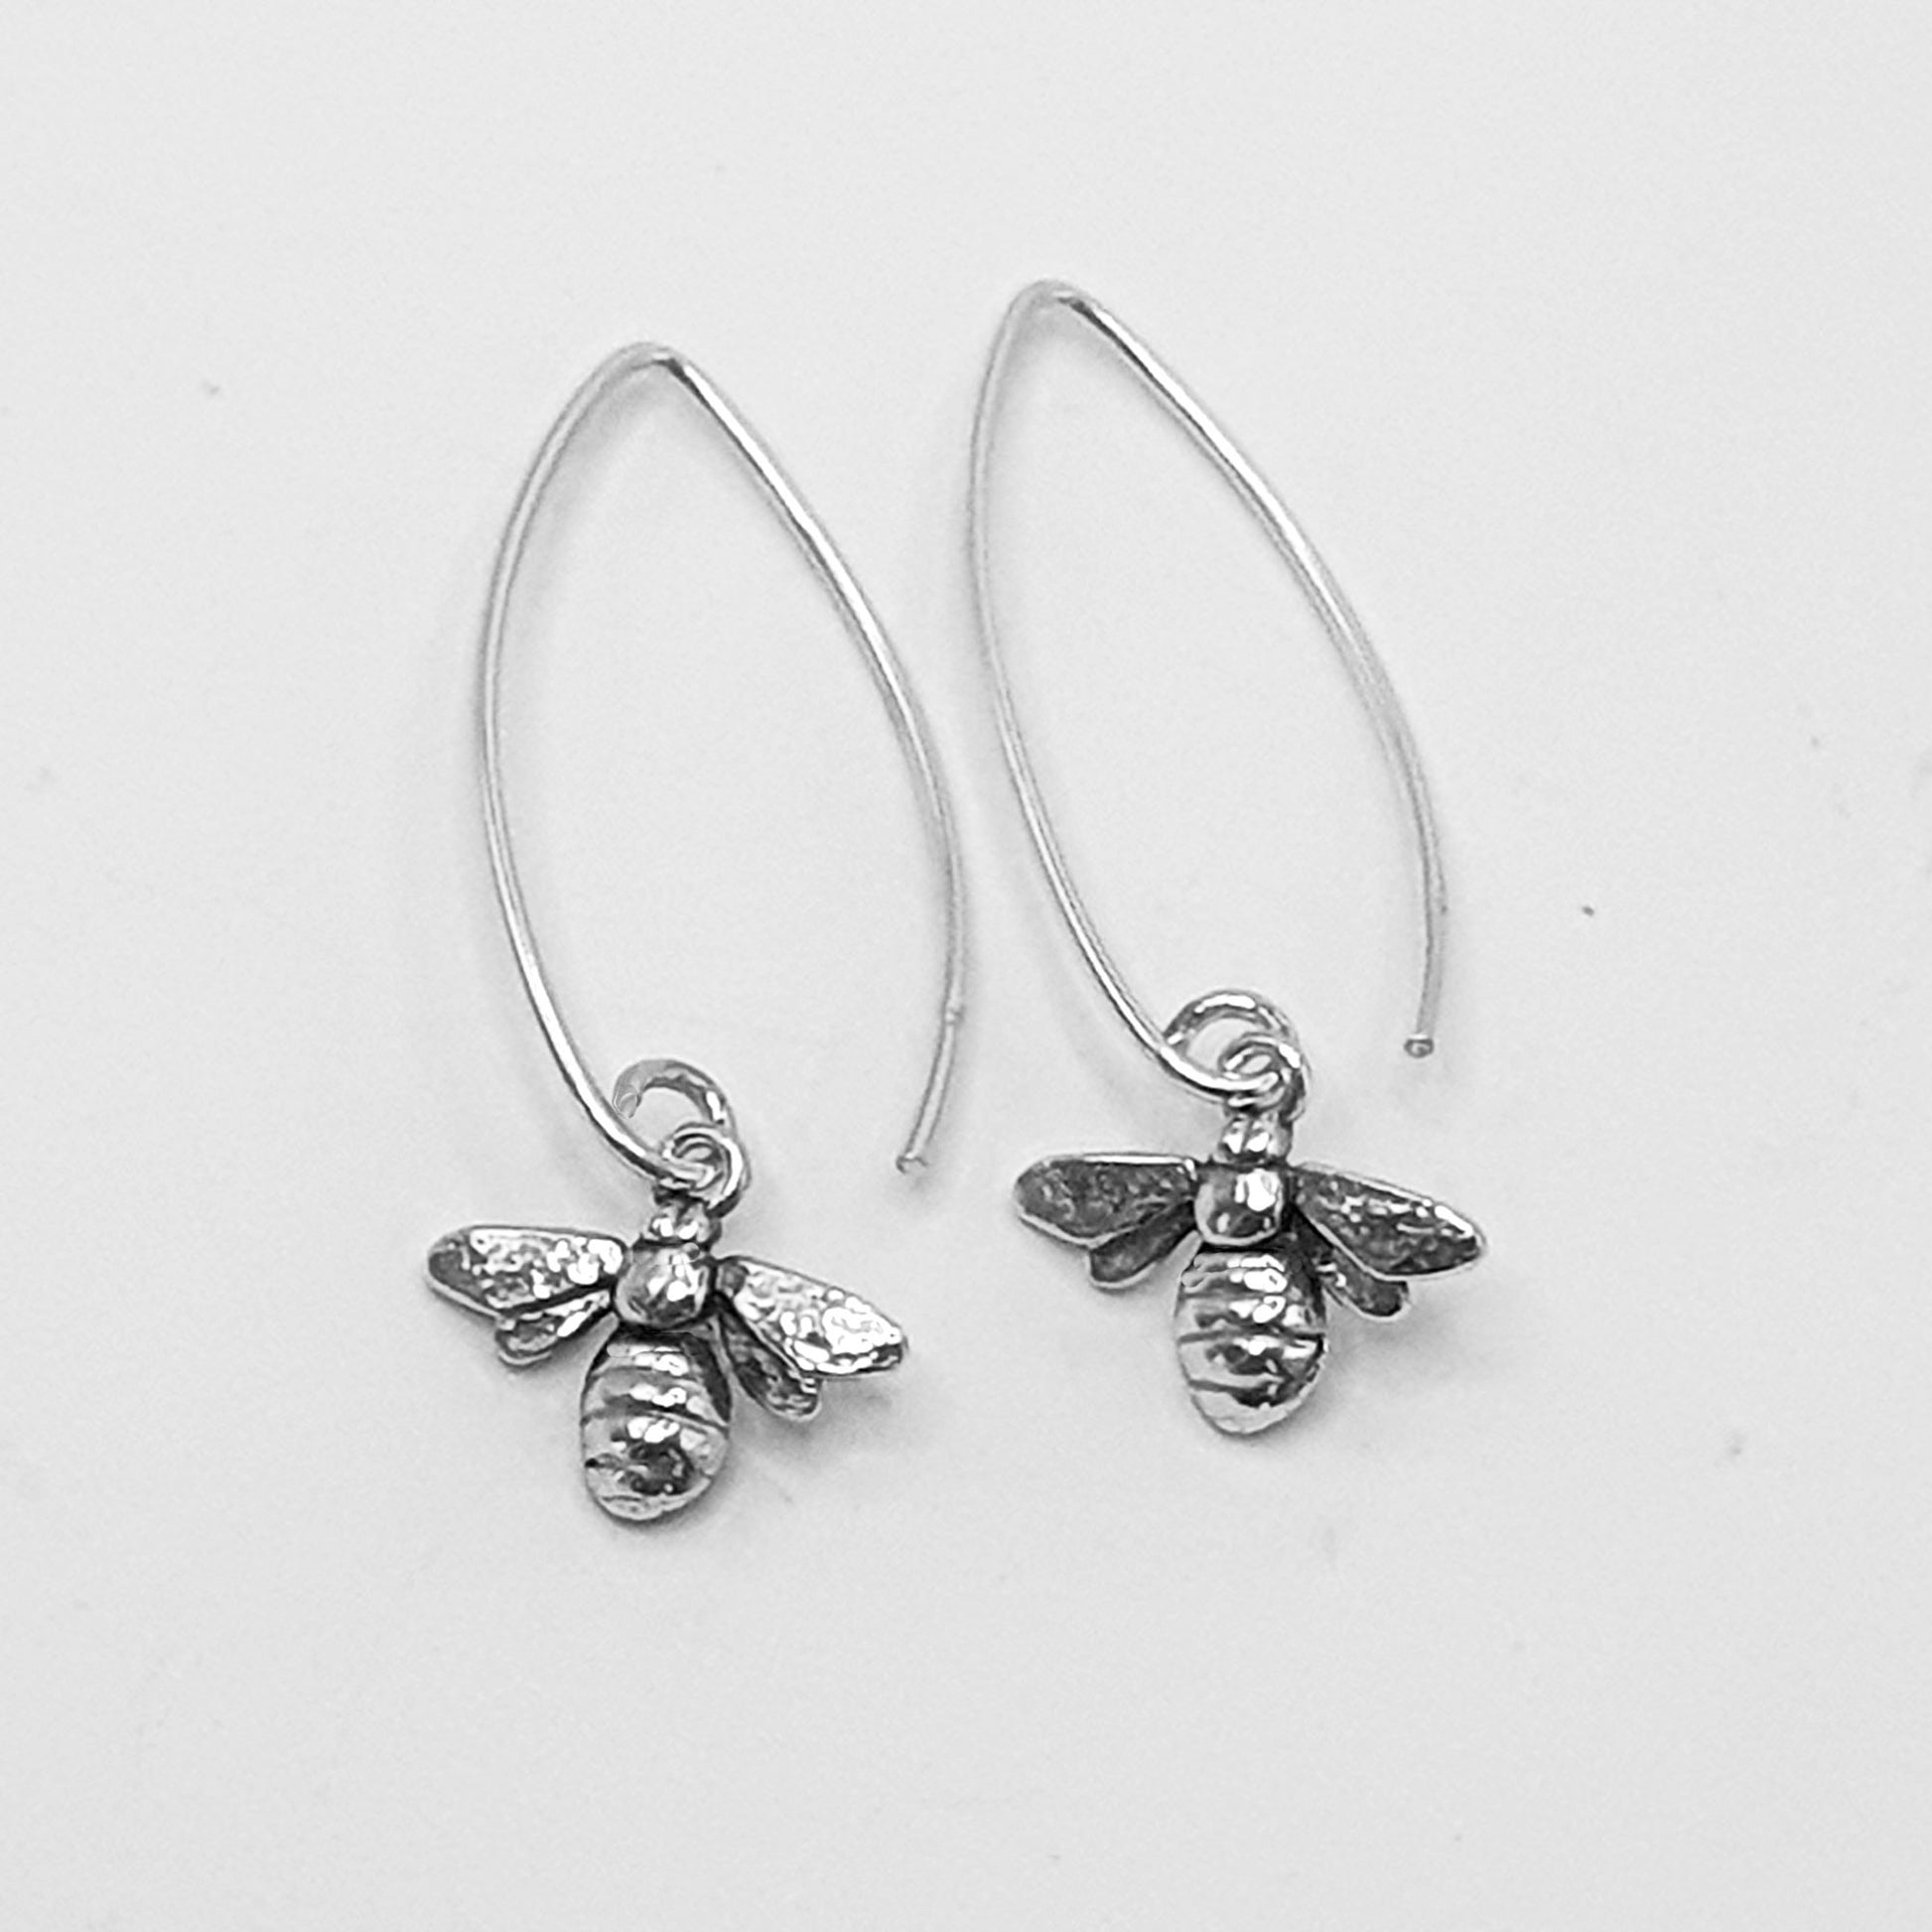 Sterling silver bees on a long oval ear wire